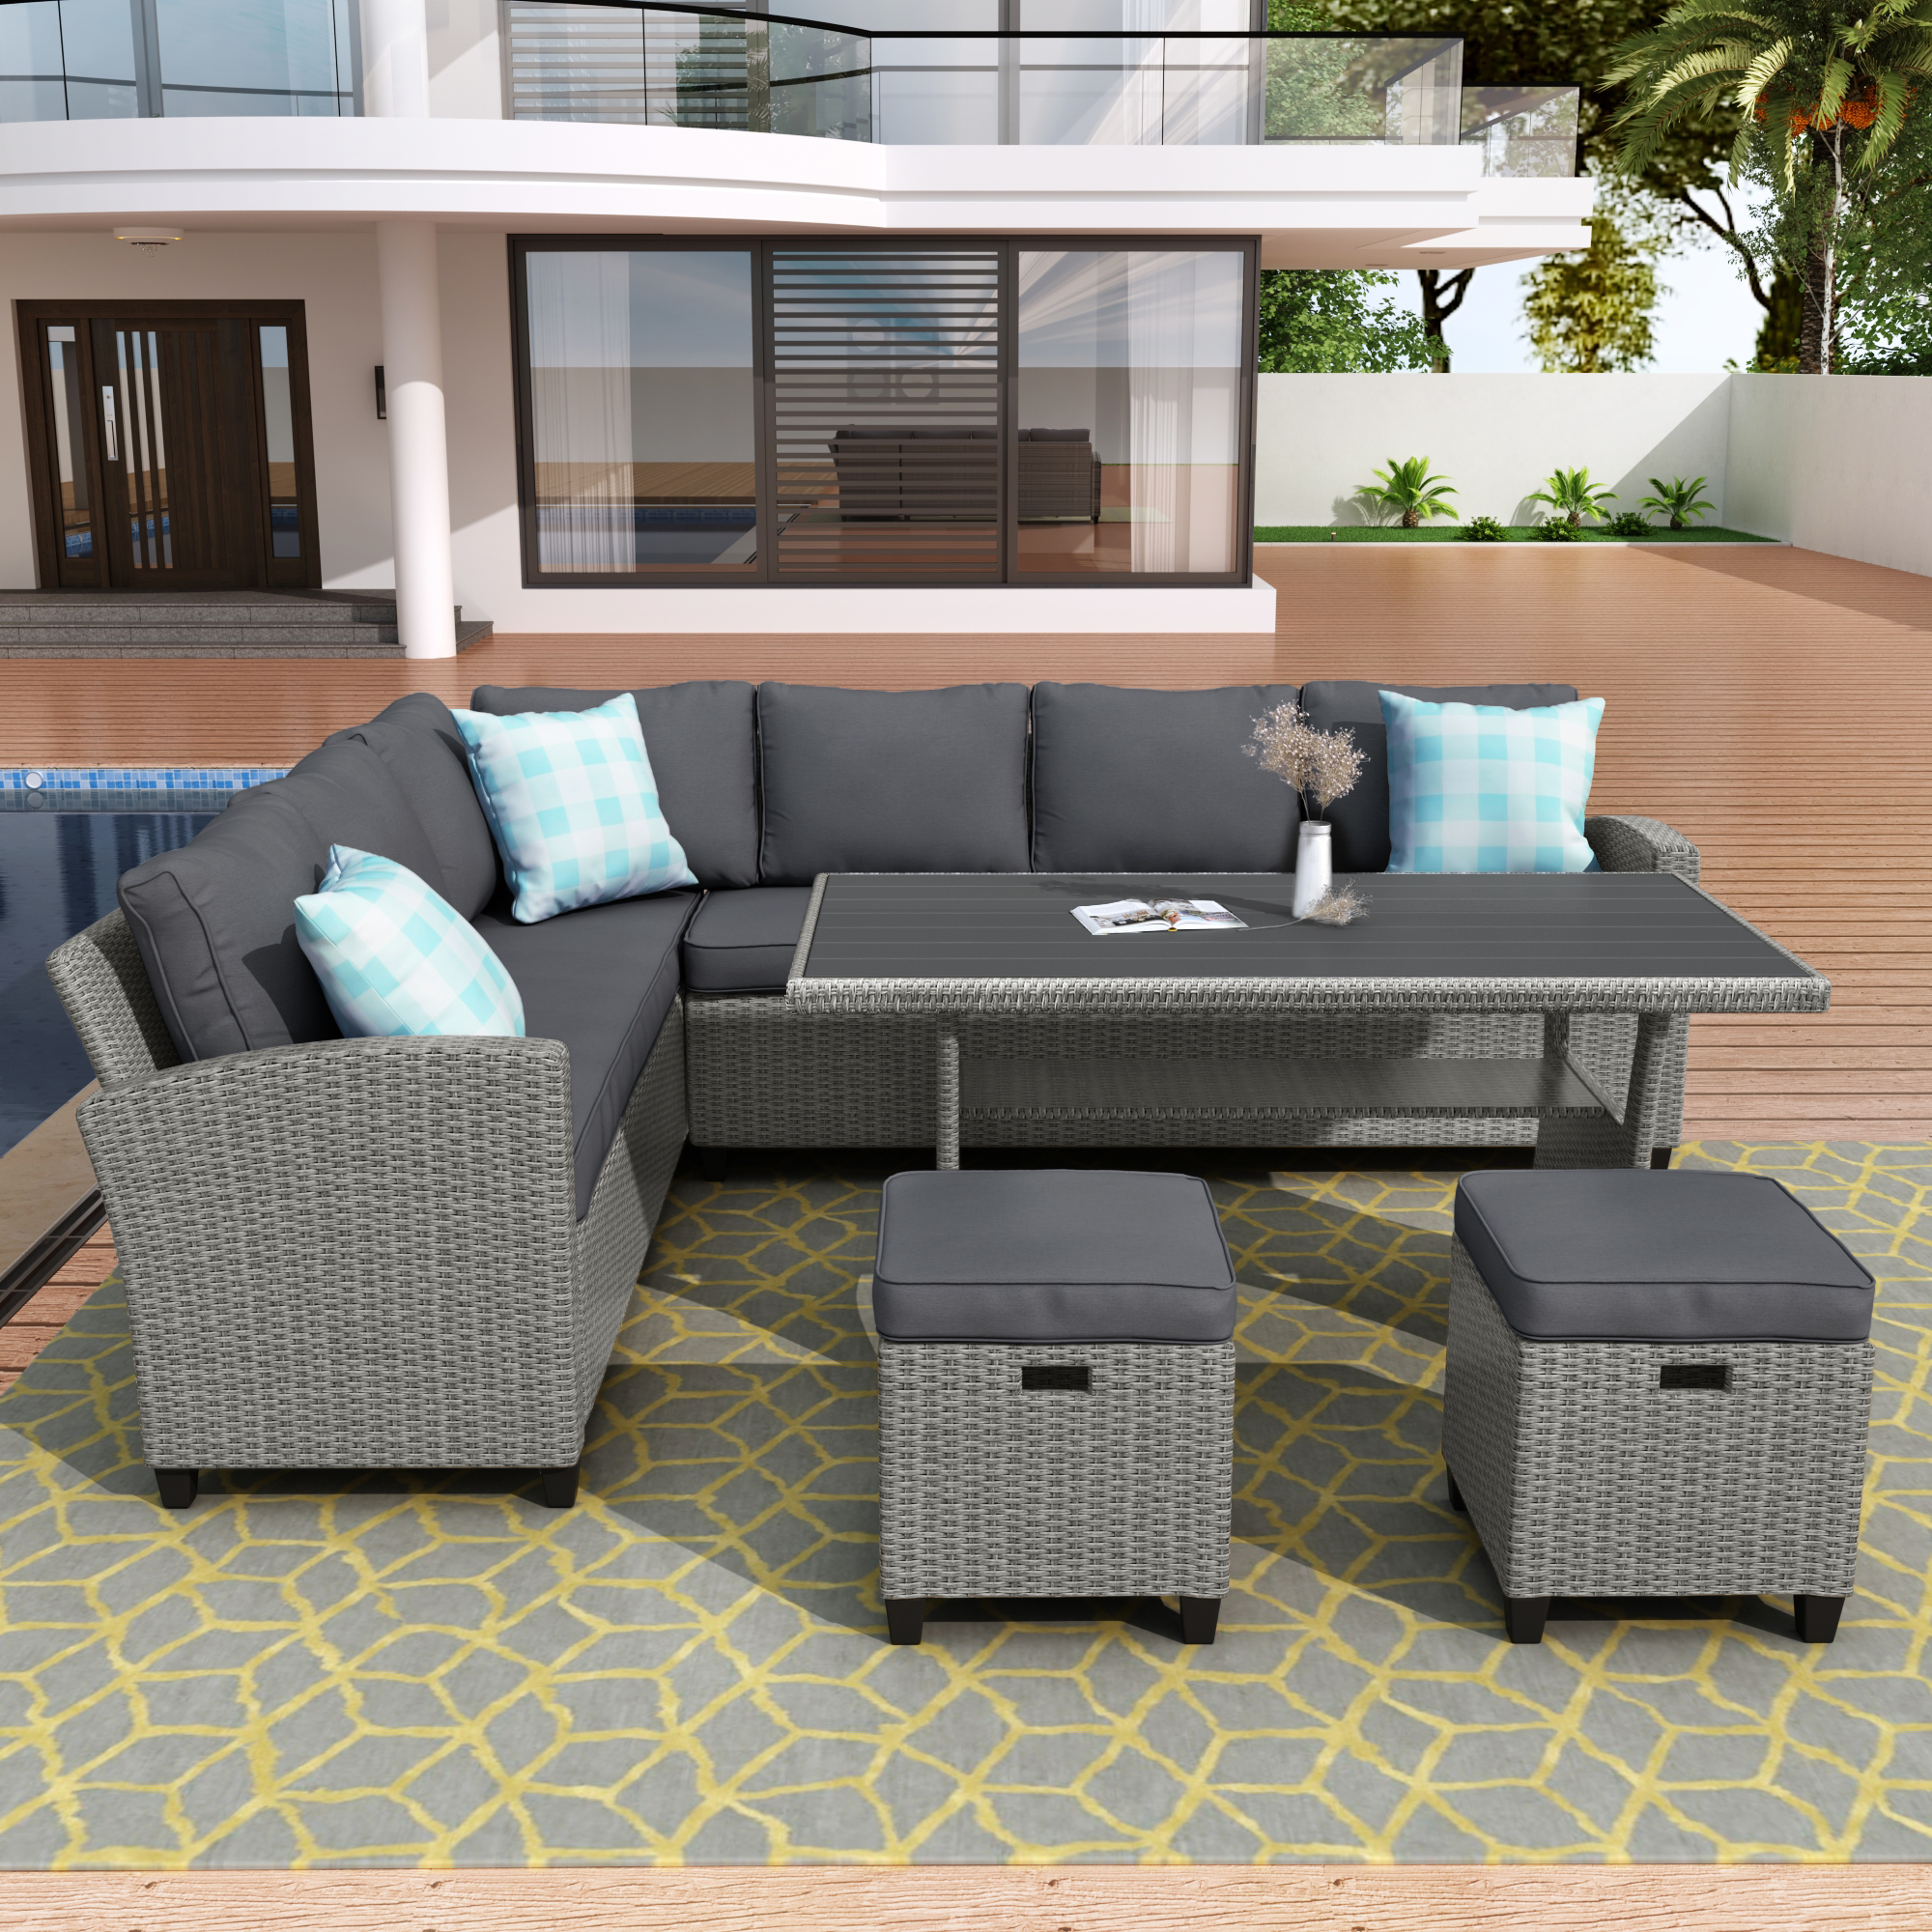 U_STYLE Patio Furniture Set, 5 Piece Outdoor Conversation Set,  Dining Table Chair with Ottoman and Throw Pillows-CASAINC